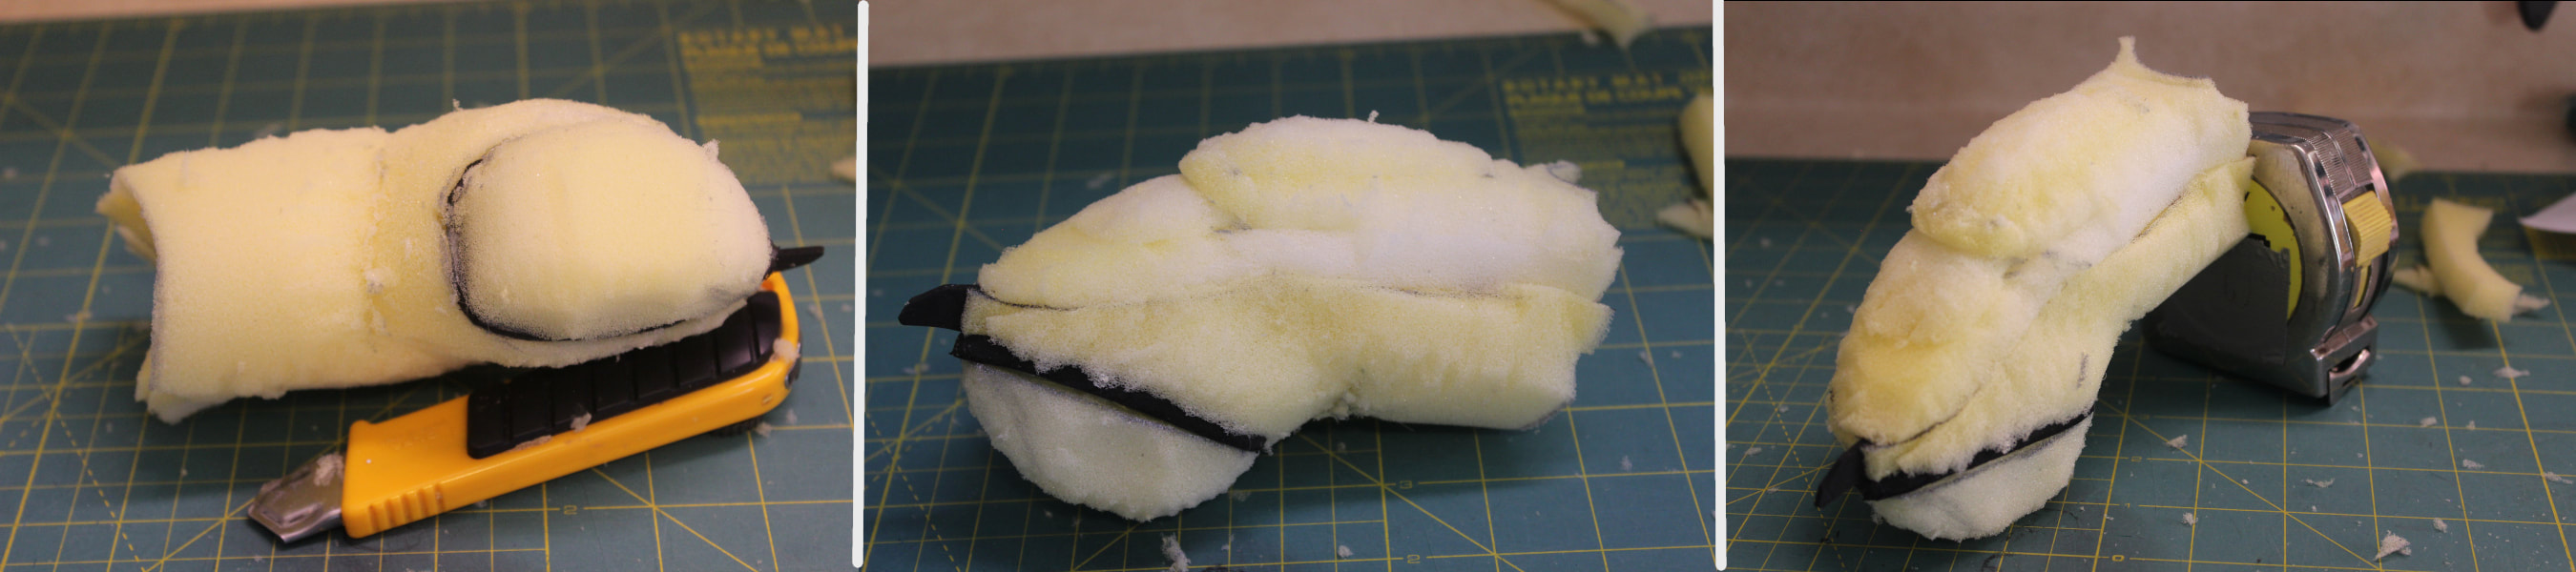 carving a finger out of foam for a handpaw